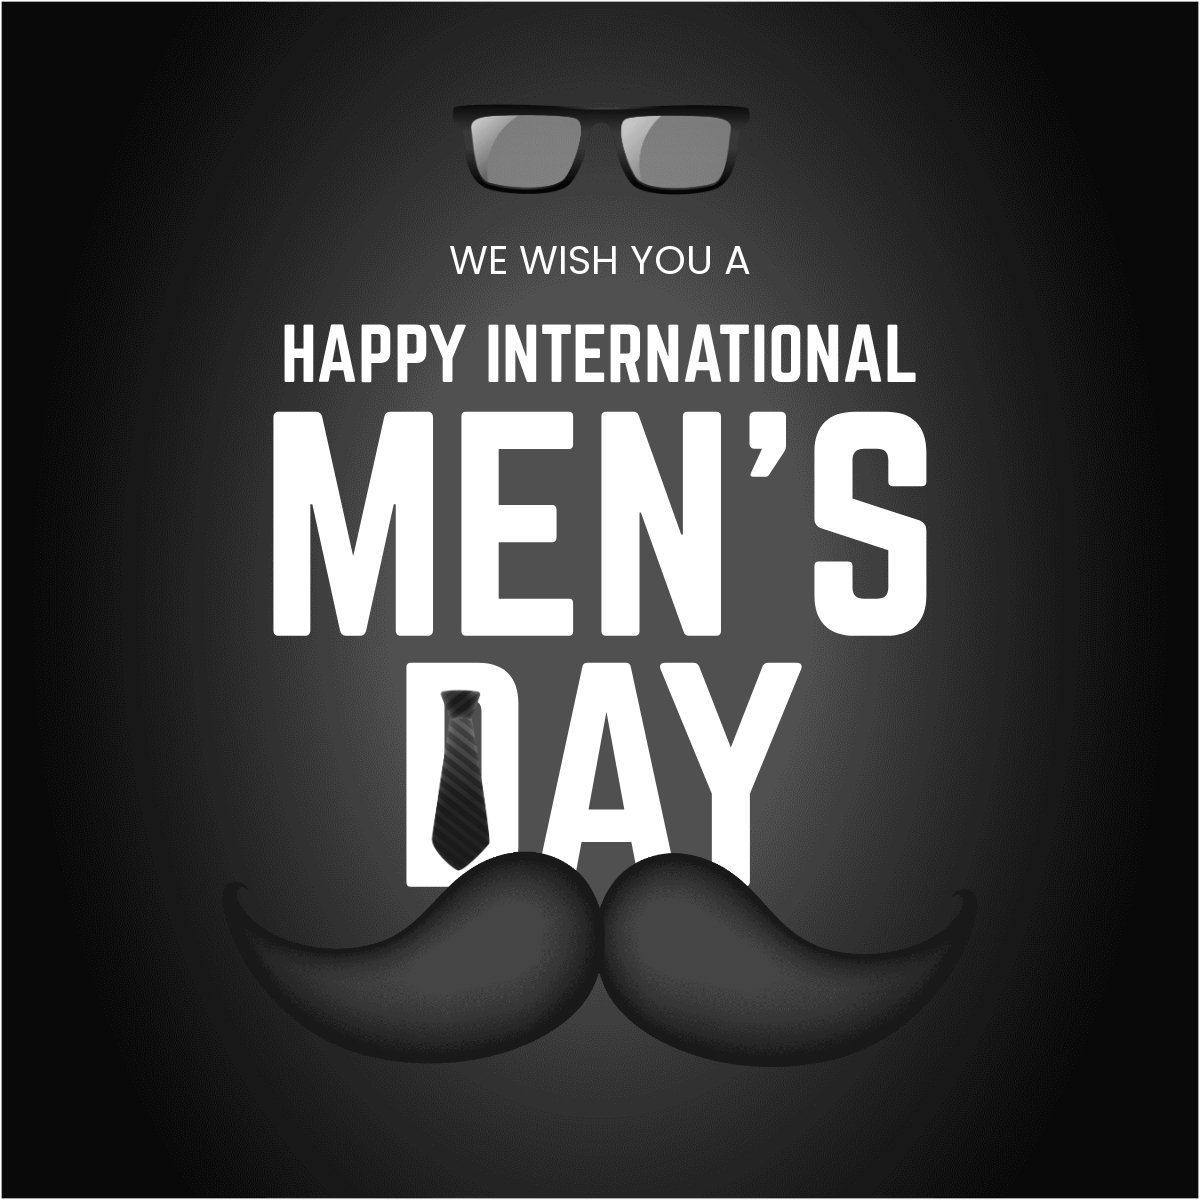 International Mens Day Wishes Linkedin Post Template